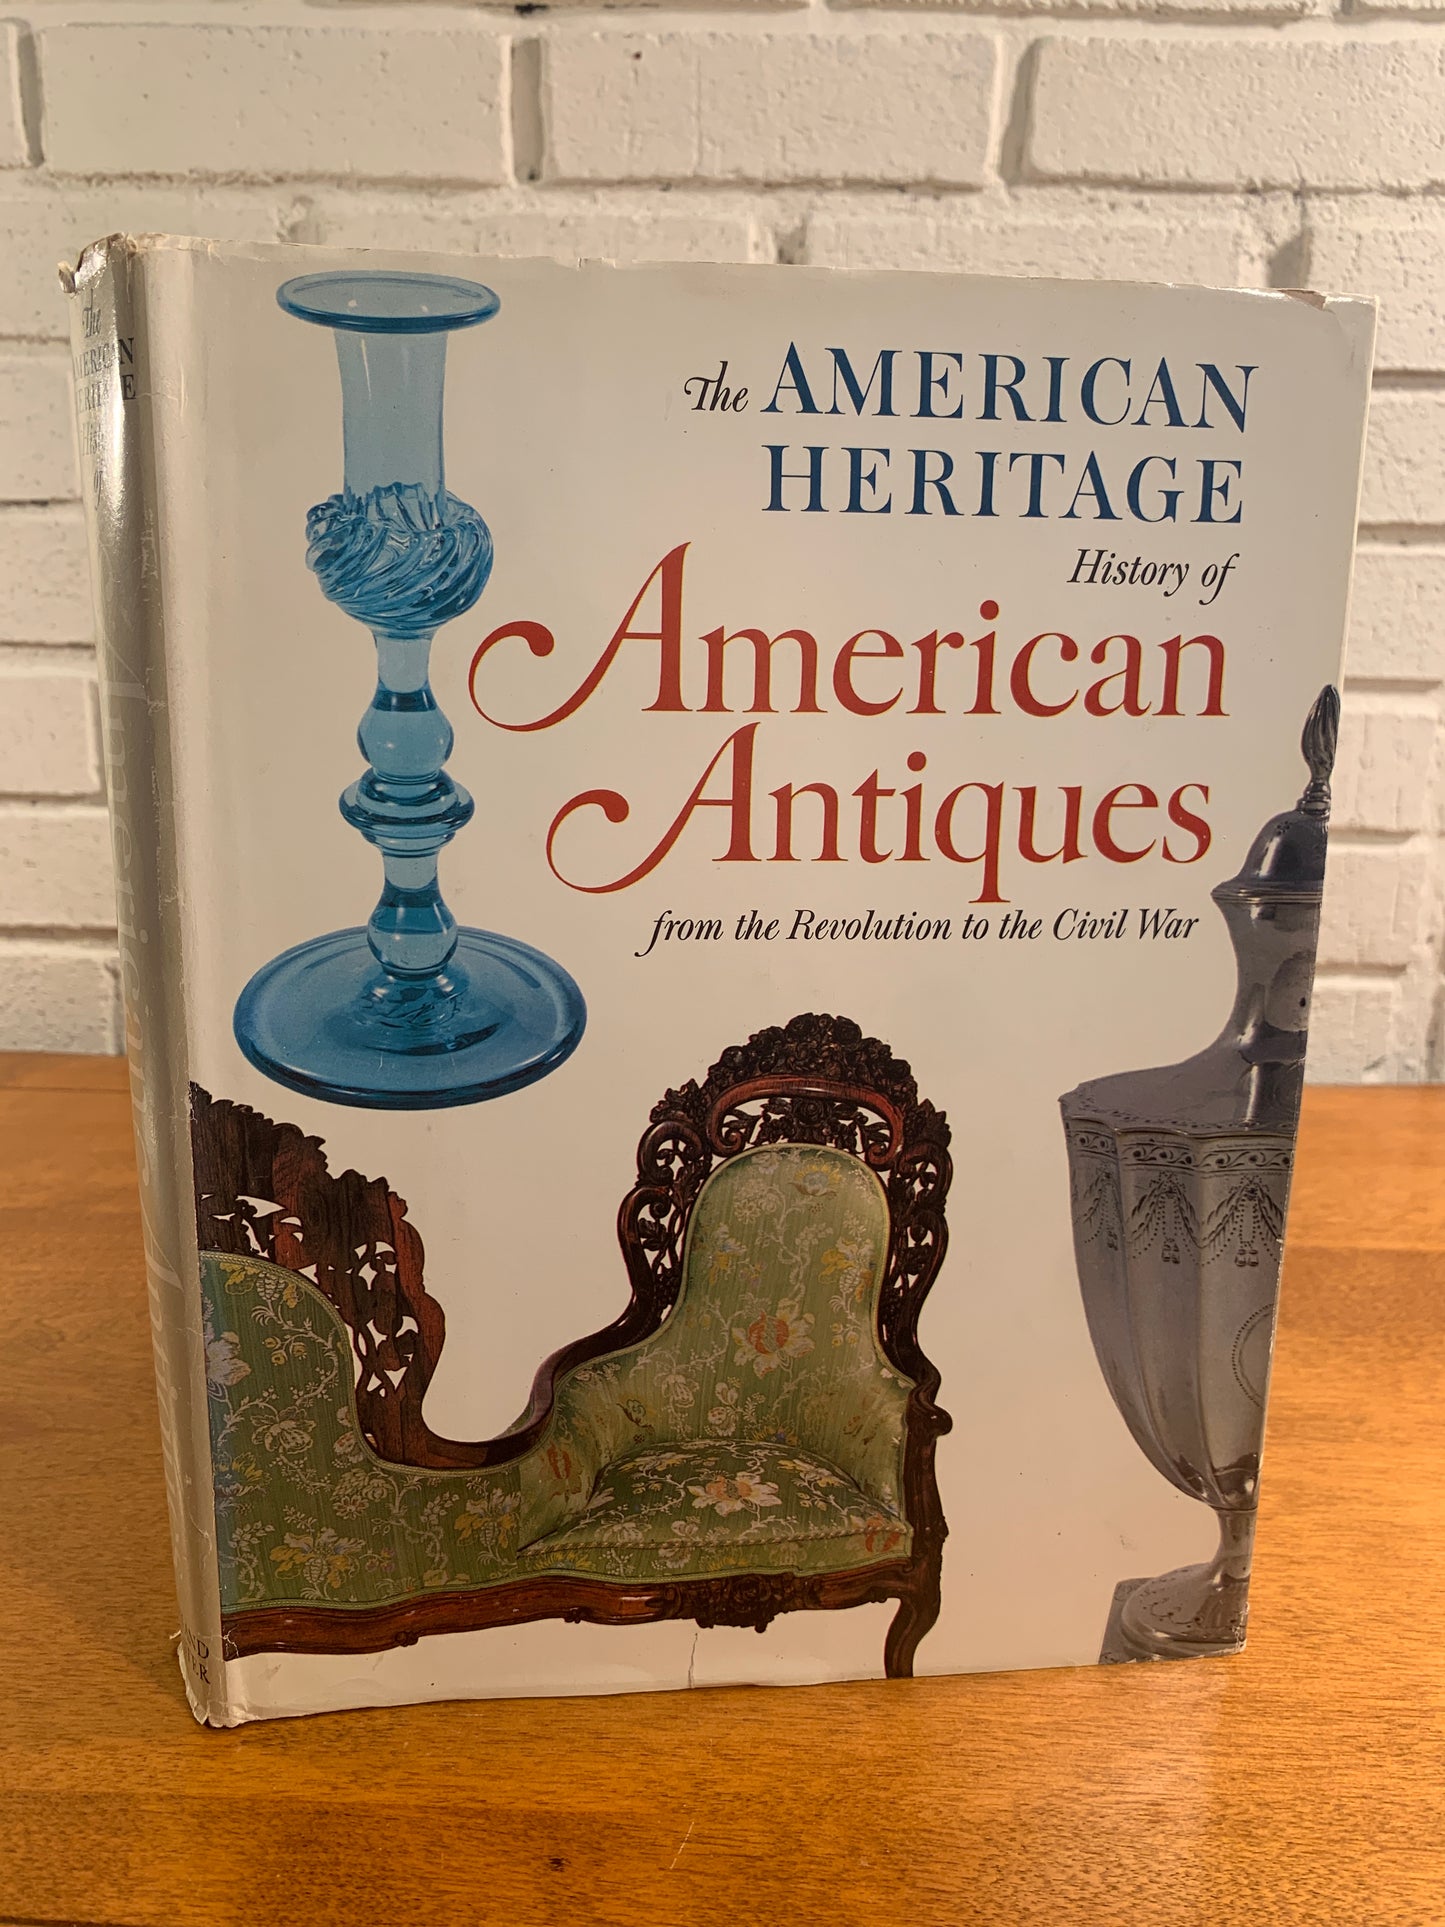 The American Heritage History of American Antiques from the Revolution to Civil War